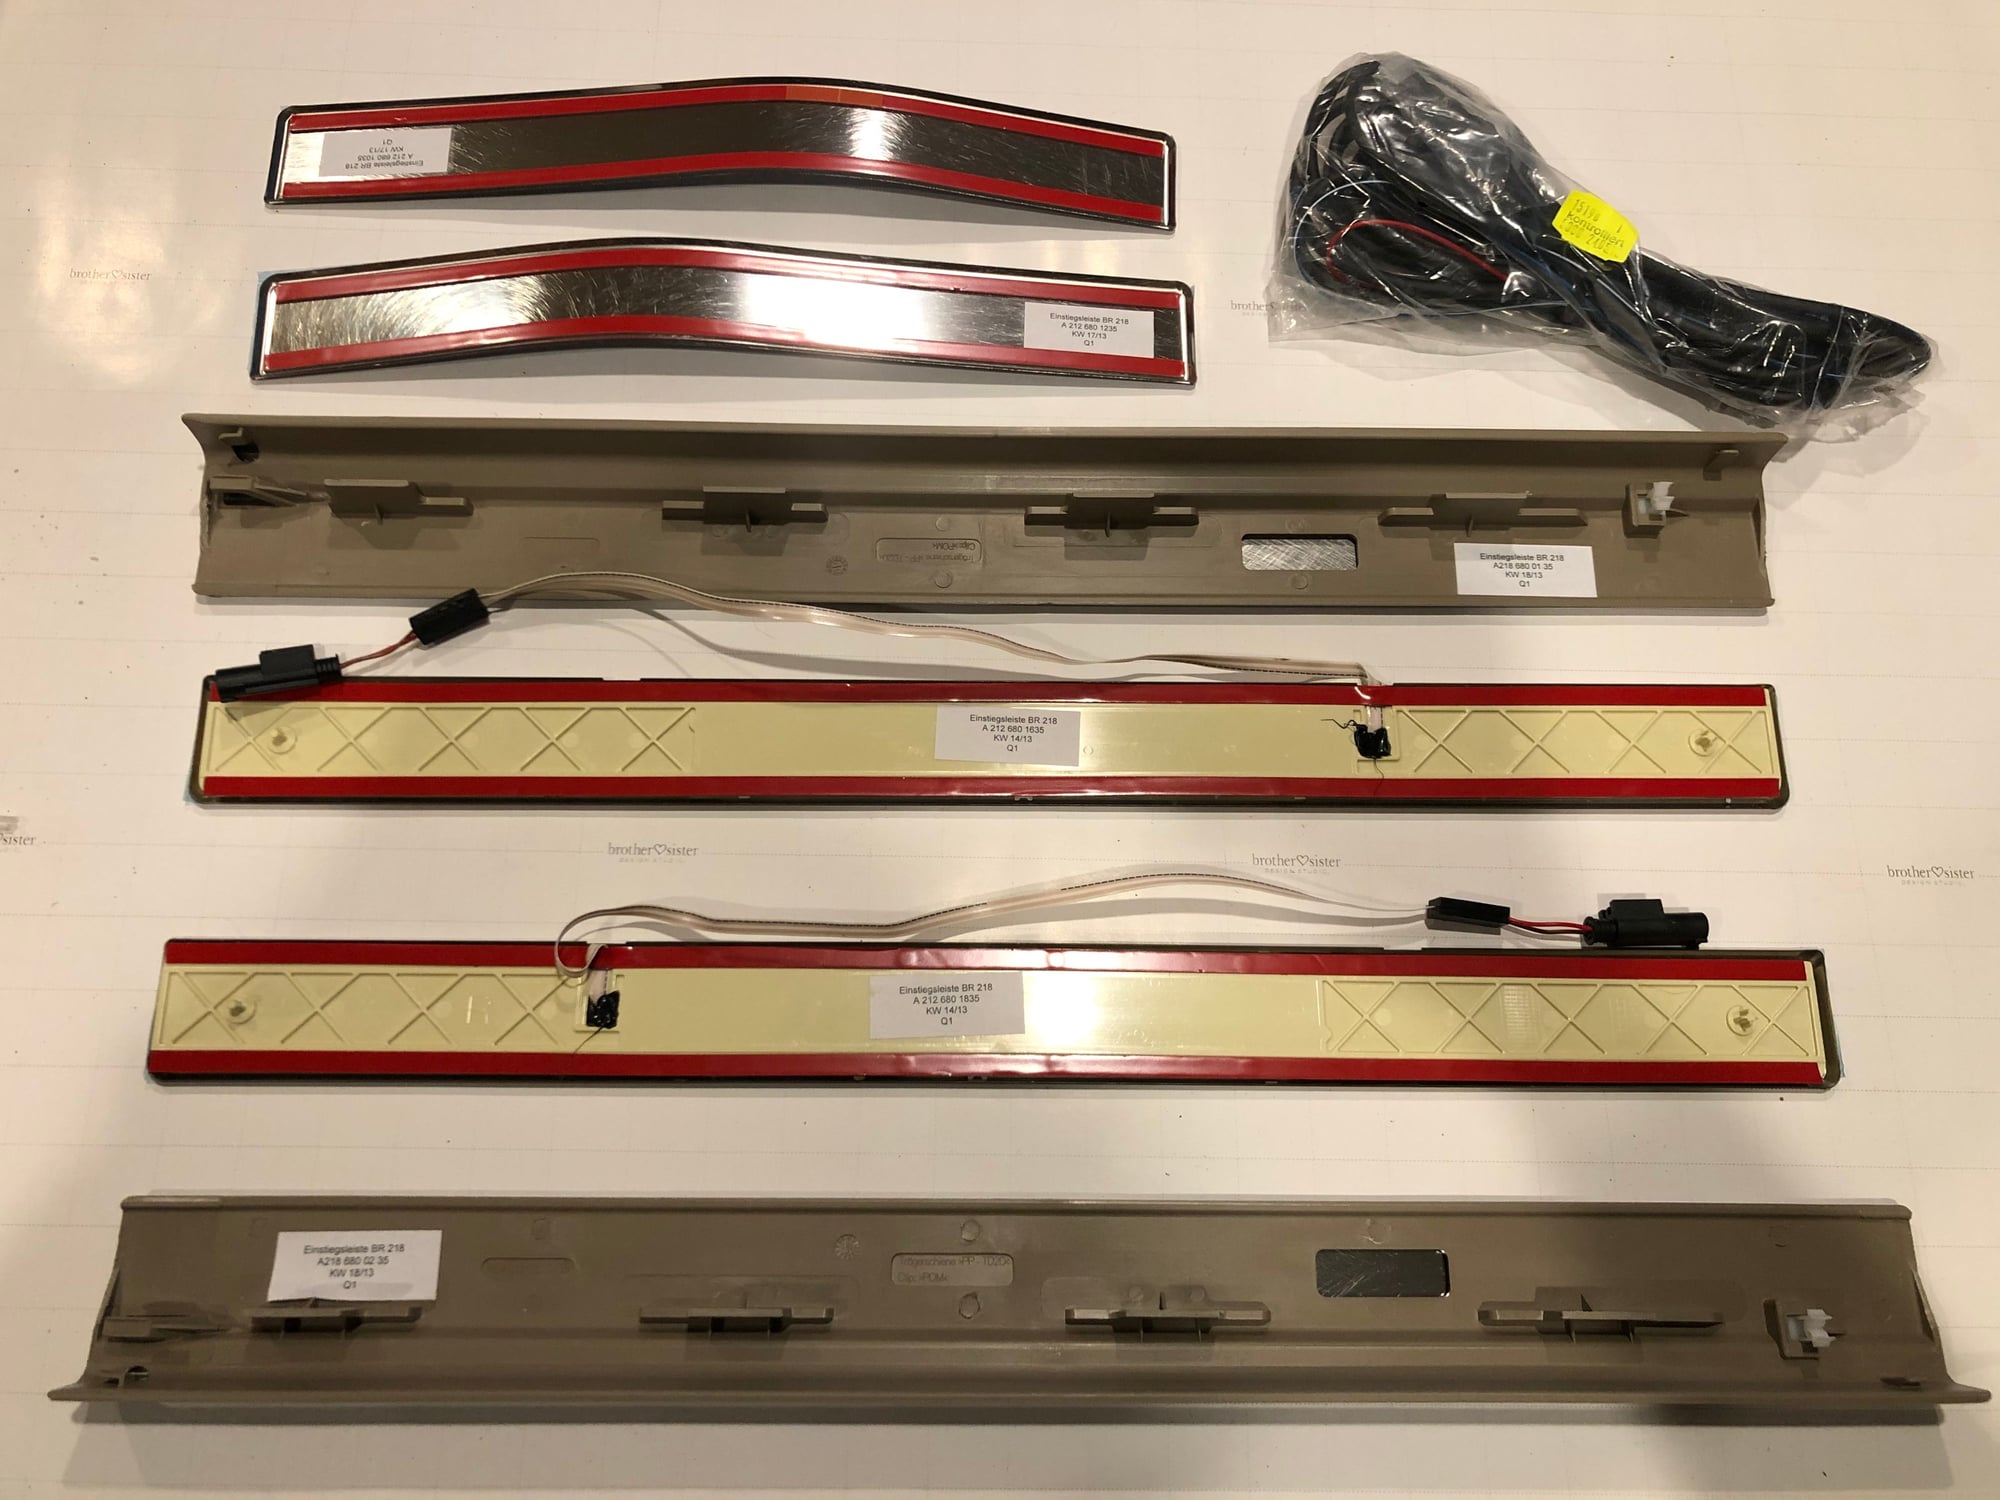 Accessories - OEM CLS550 (C218) Illuminated Door Sills (BRAND NEW in ORIGINAL BOX) - New - 2012 to 2018 Mercedes-Benz CLS550 - Katy, TX 77494, United States